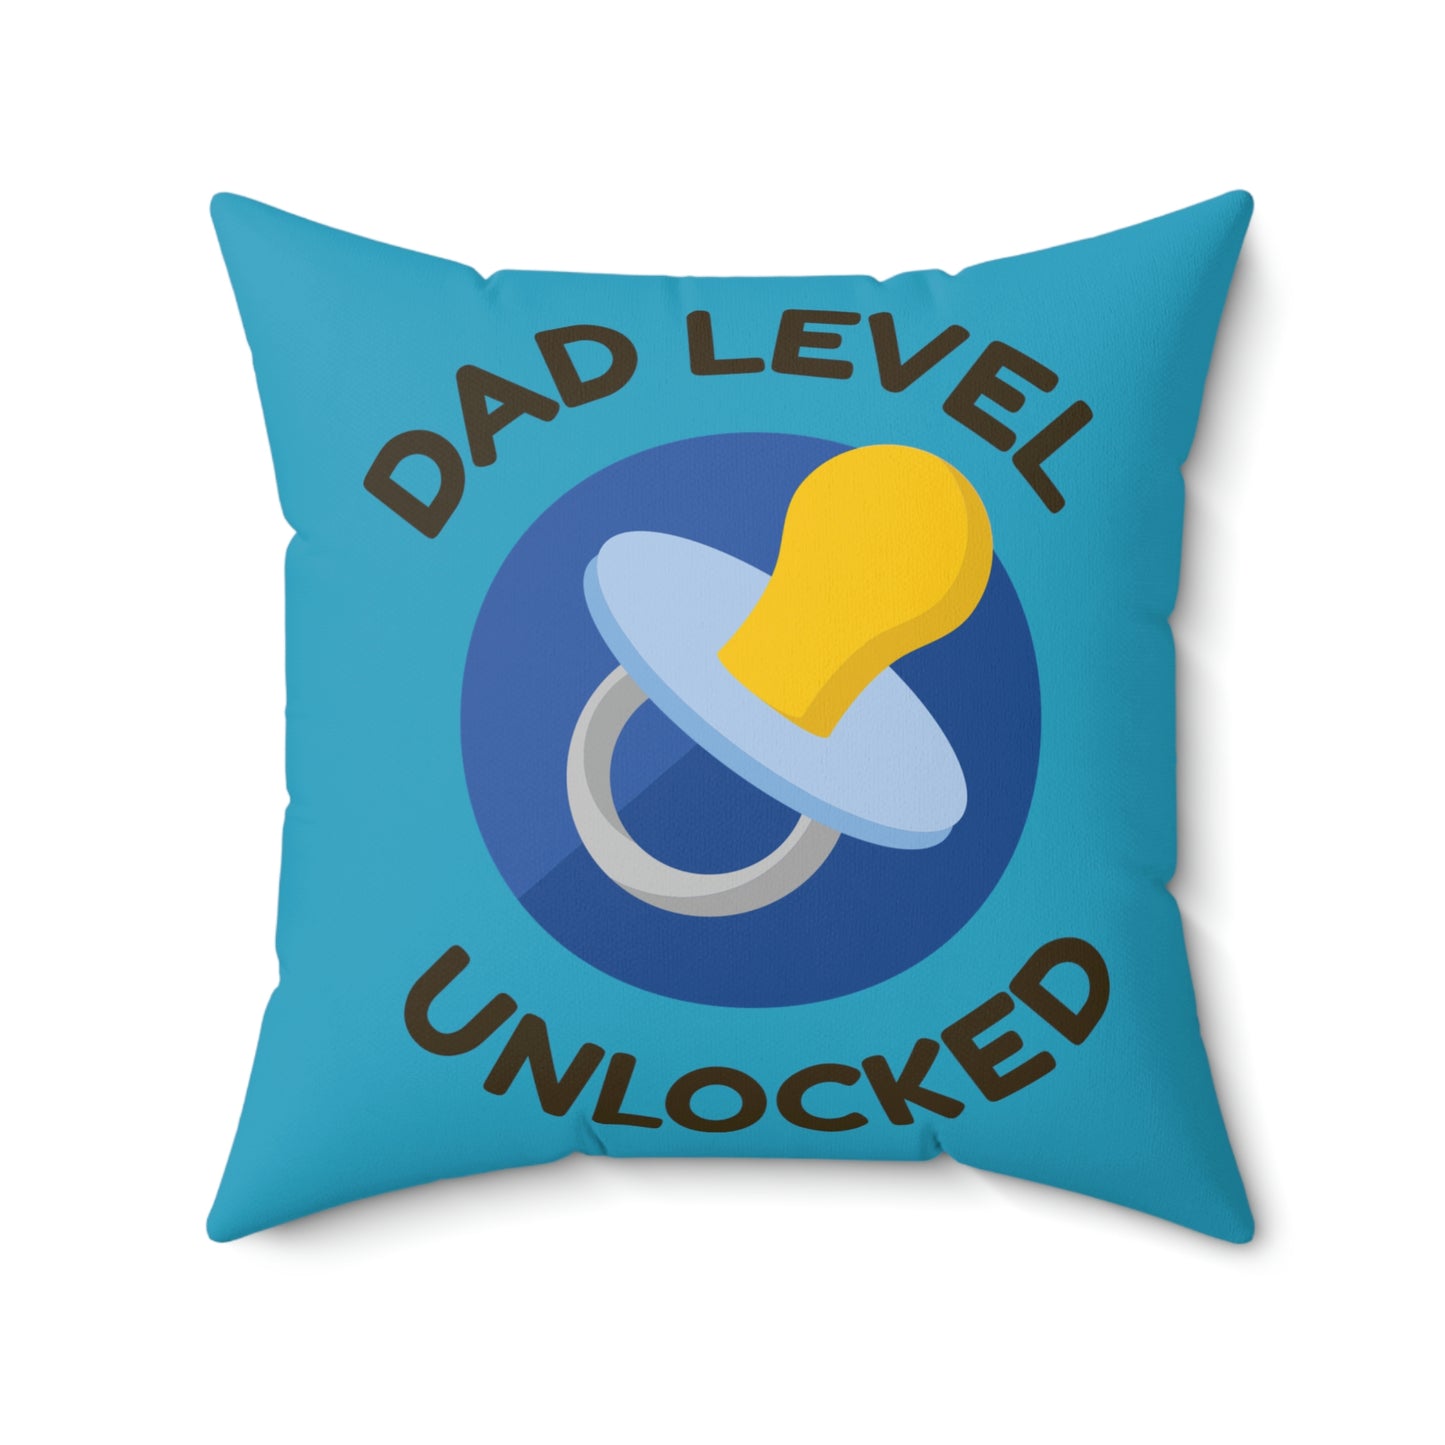 Spun Polyester Square Pillow Case "Dad Level Unlocked on Turquoise”